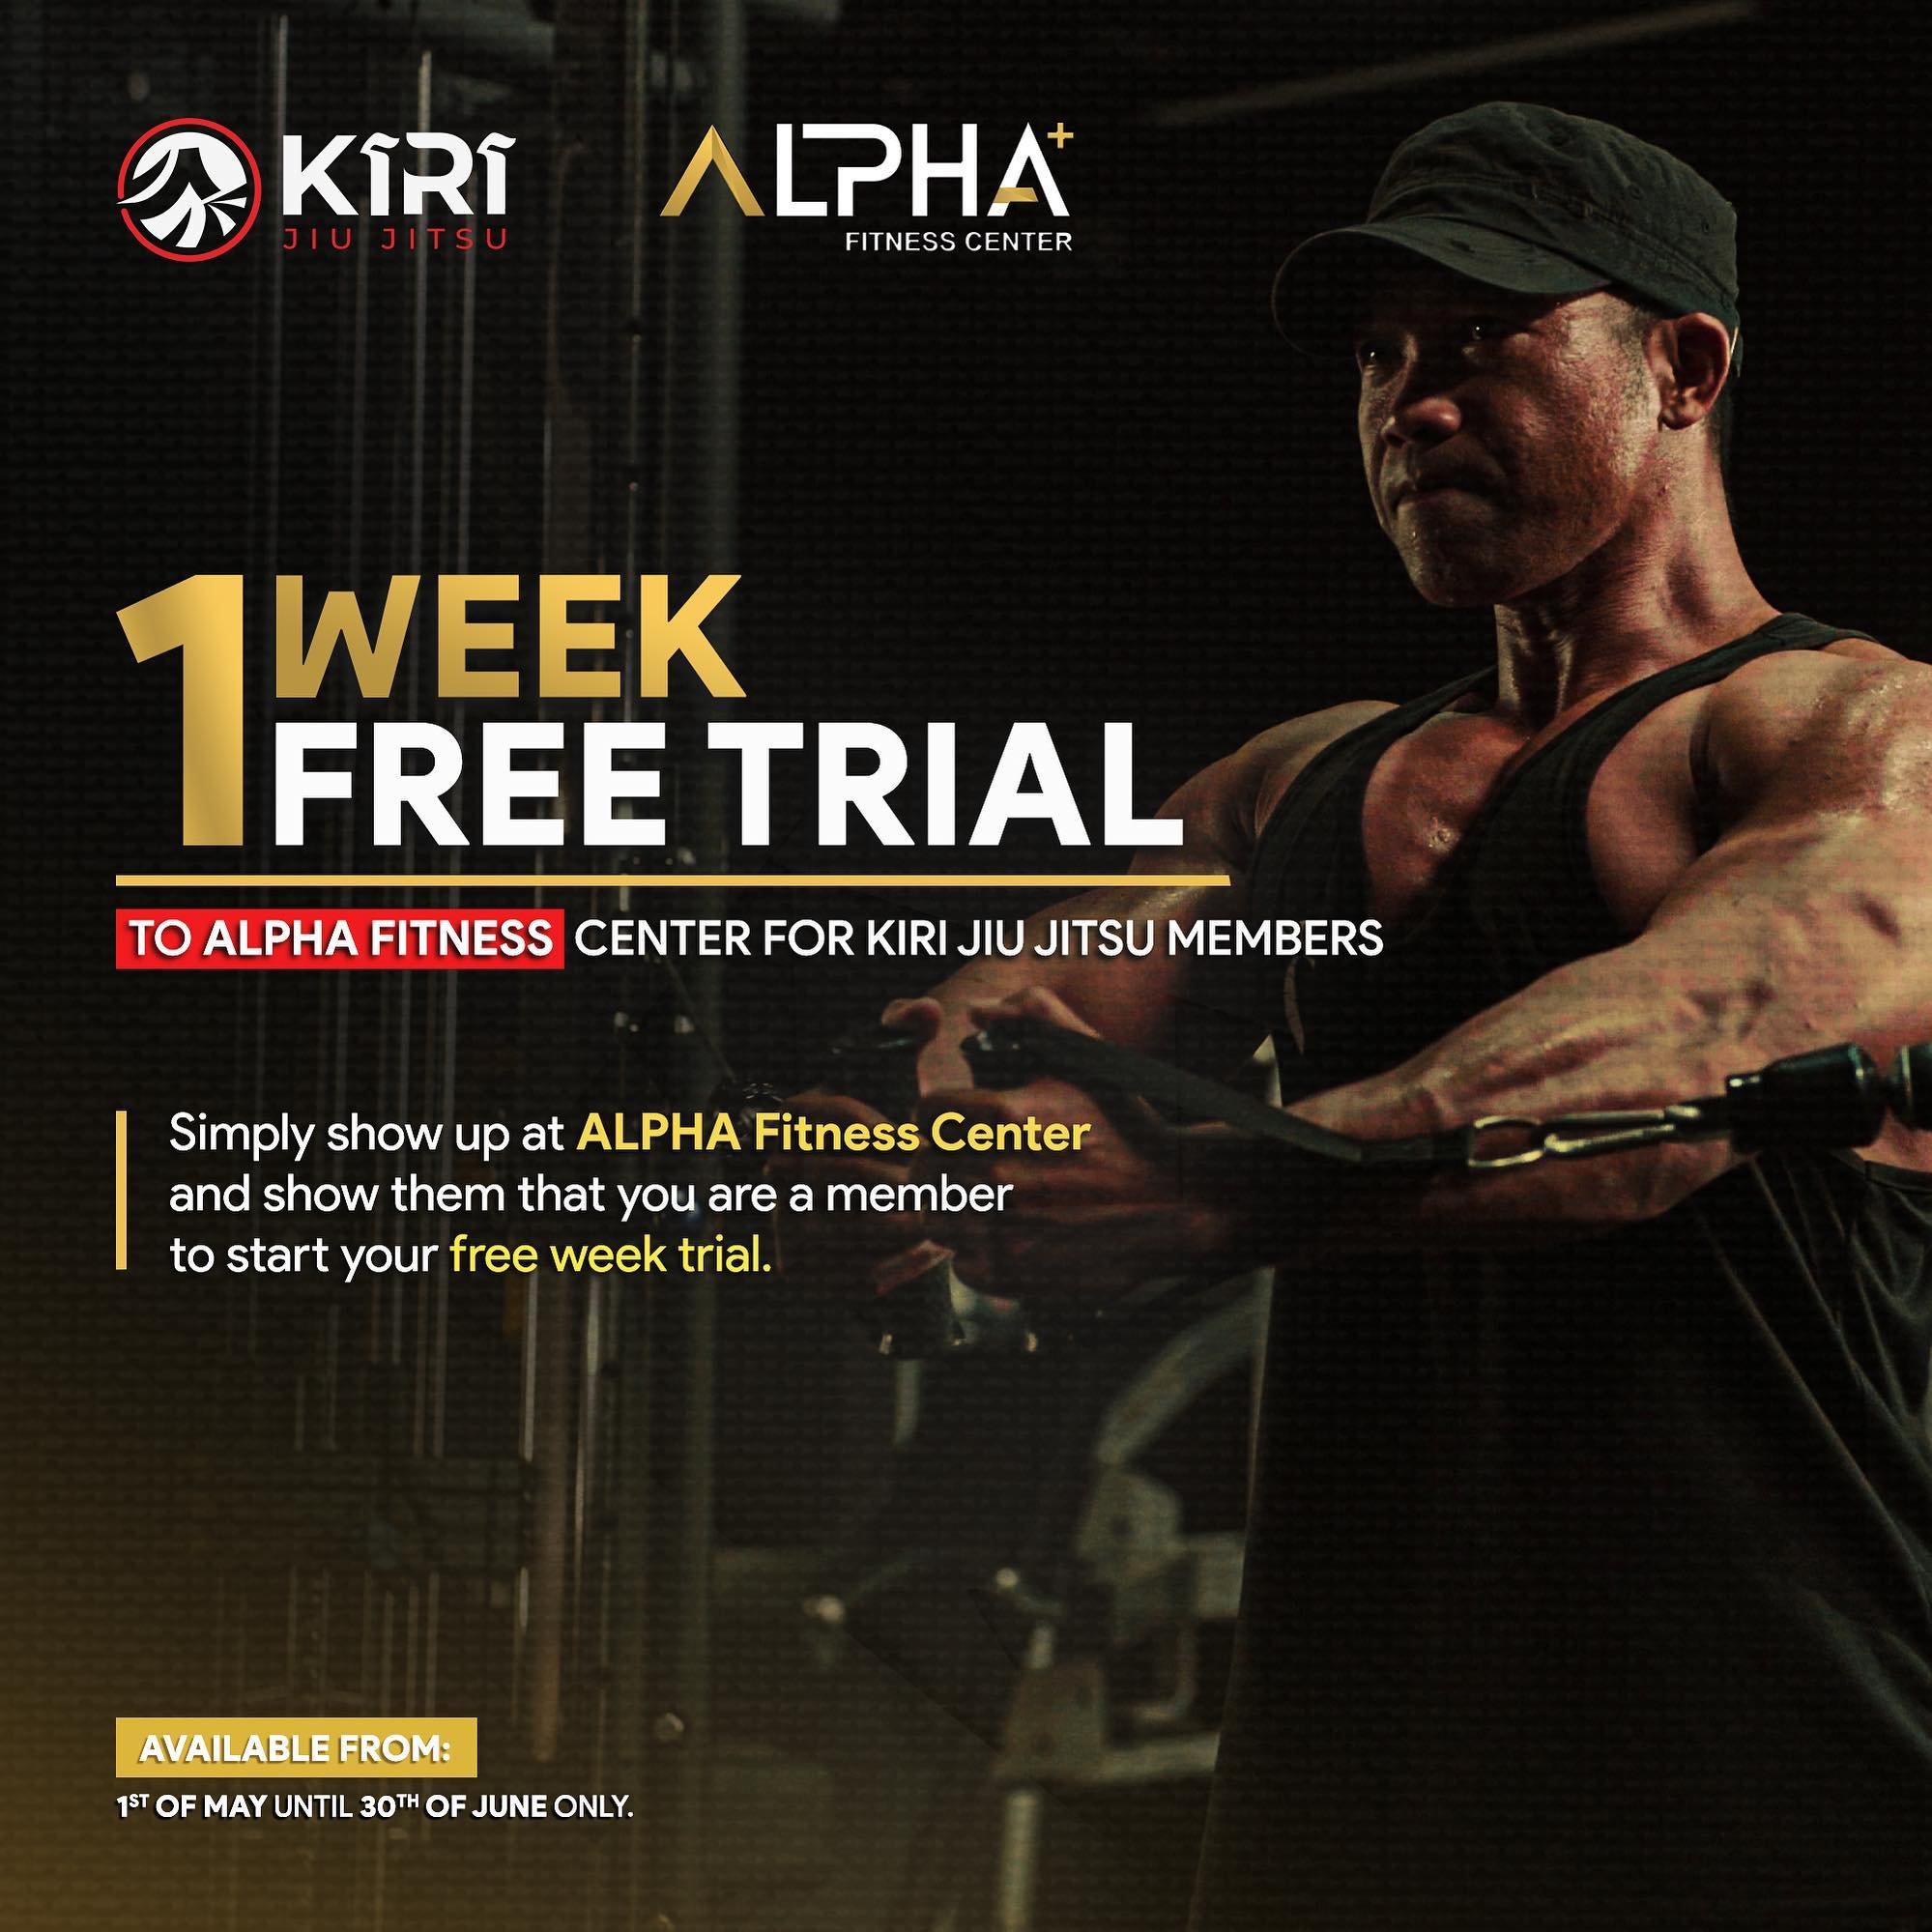 🤝 Collaboration Announcement:

We&rsquo;re pleased to share an collaboration between KIRI Jiu-Jitsu and ALPHA FITNESS CENTER! @alphaplus.fitnesscenter 

✨ 𝟭 𝗪𝗲𝗲𝗸 𝗙𝗿𝗲𝗲 𝗧𝗿𝗶𝗮𝗹!

Starting from May 1st until June 30th, KIRI Jiu-Jitsu member